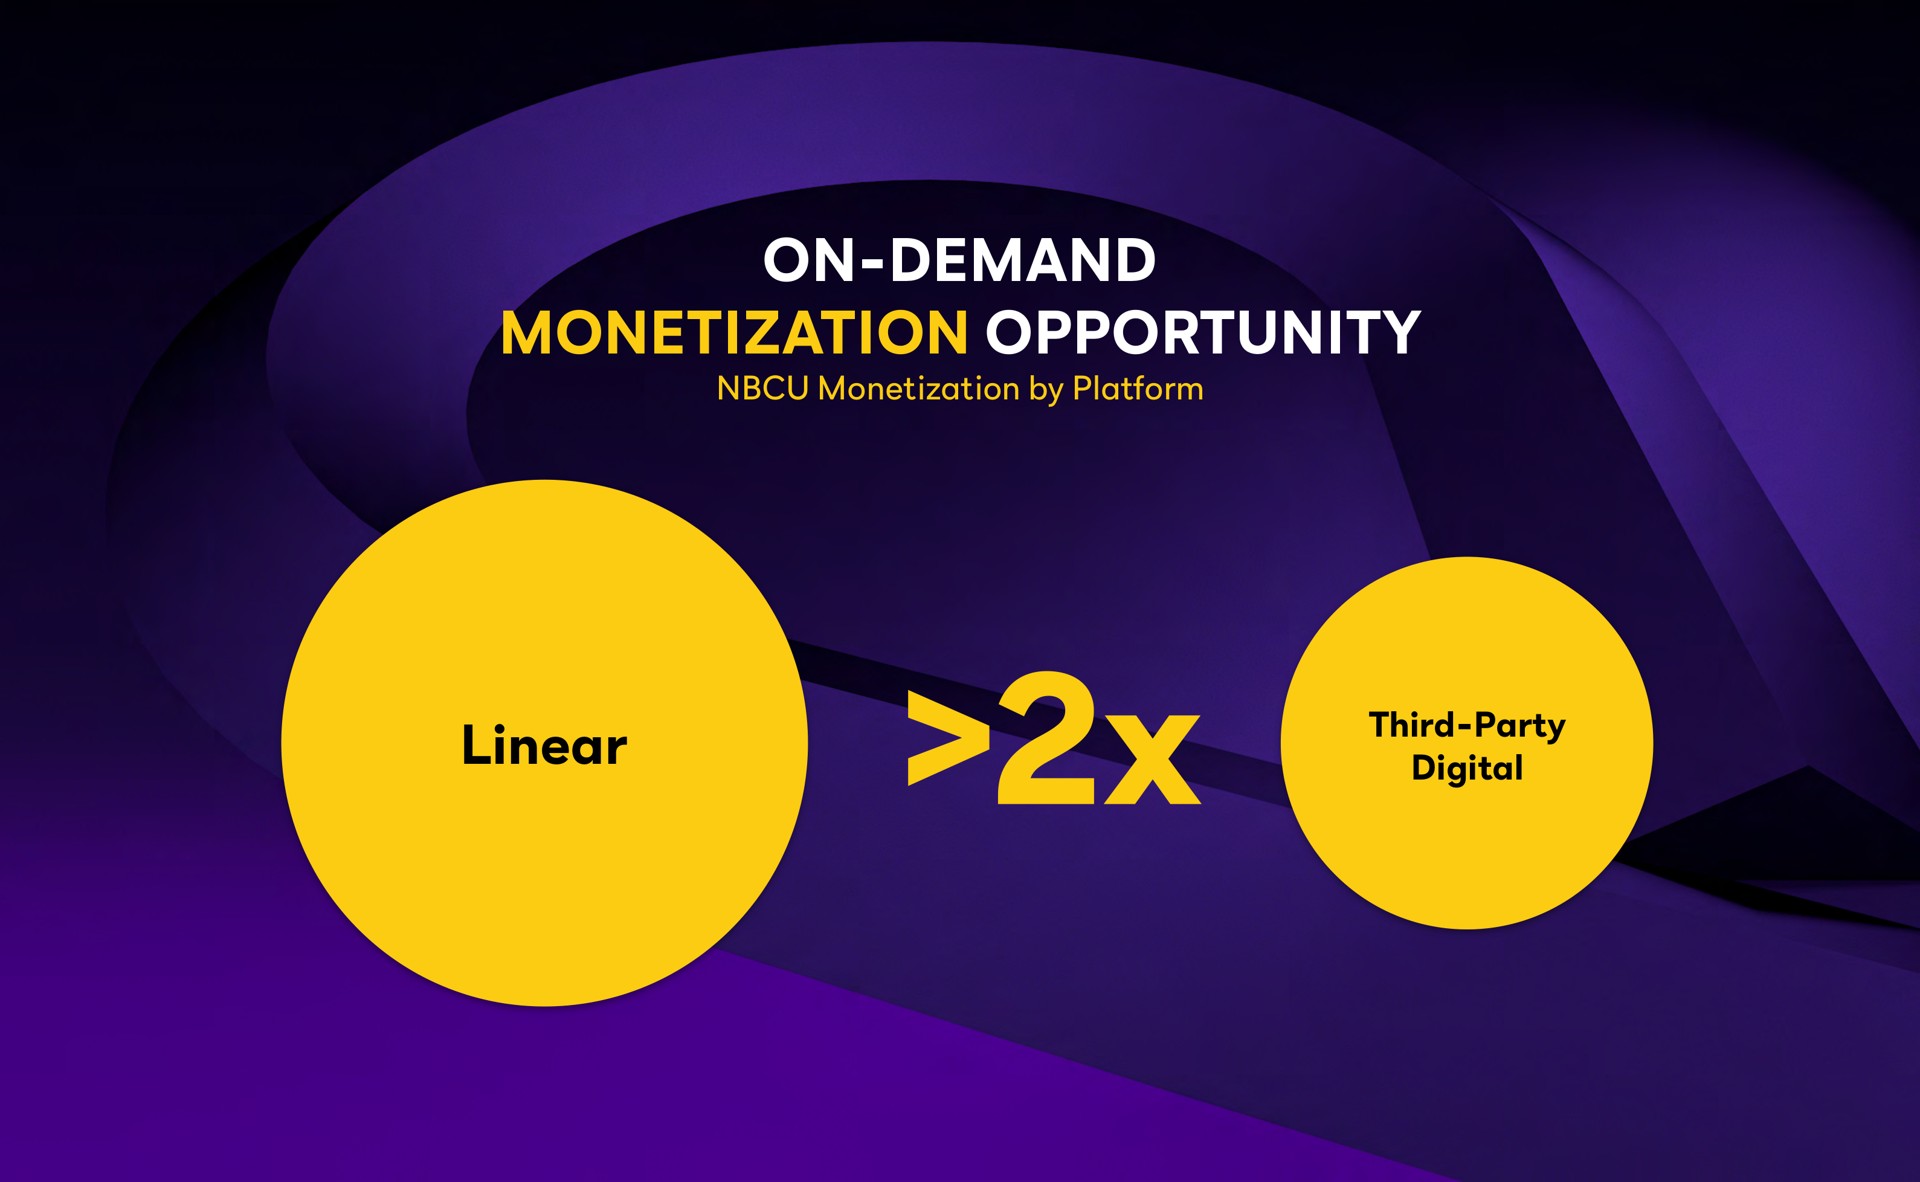 on demand monetization opportunity linear | Comcast